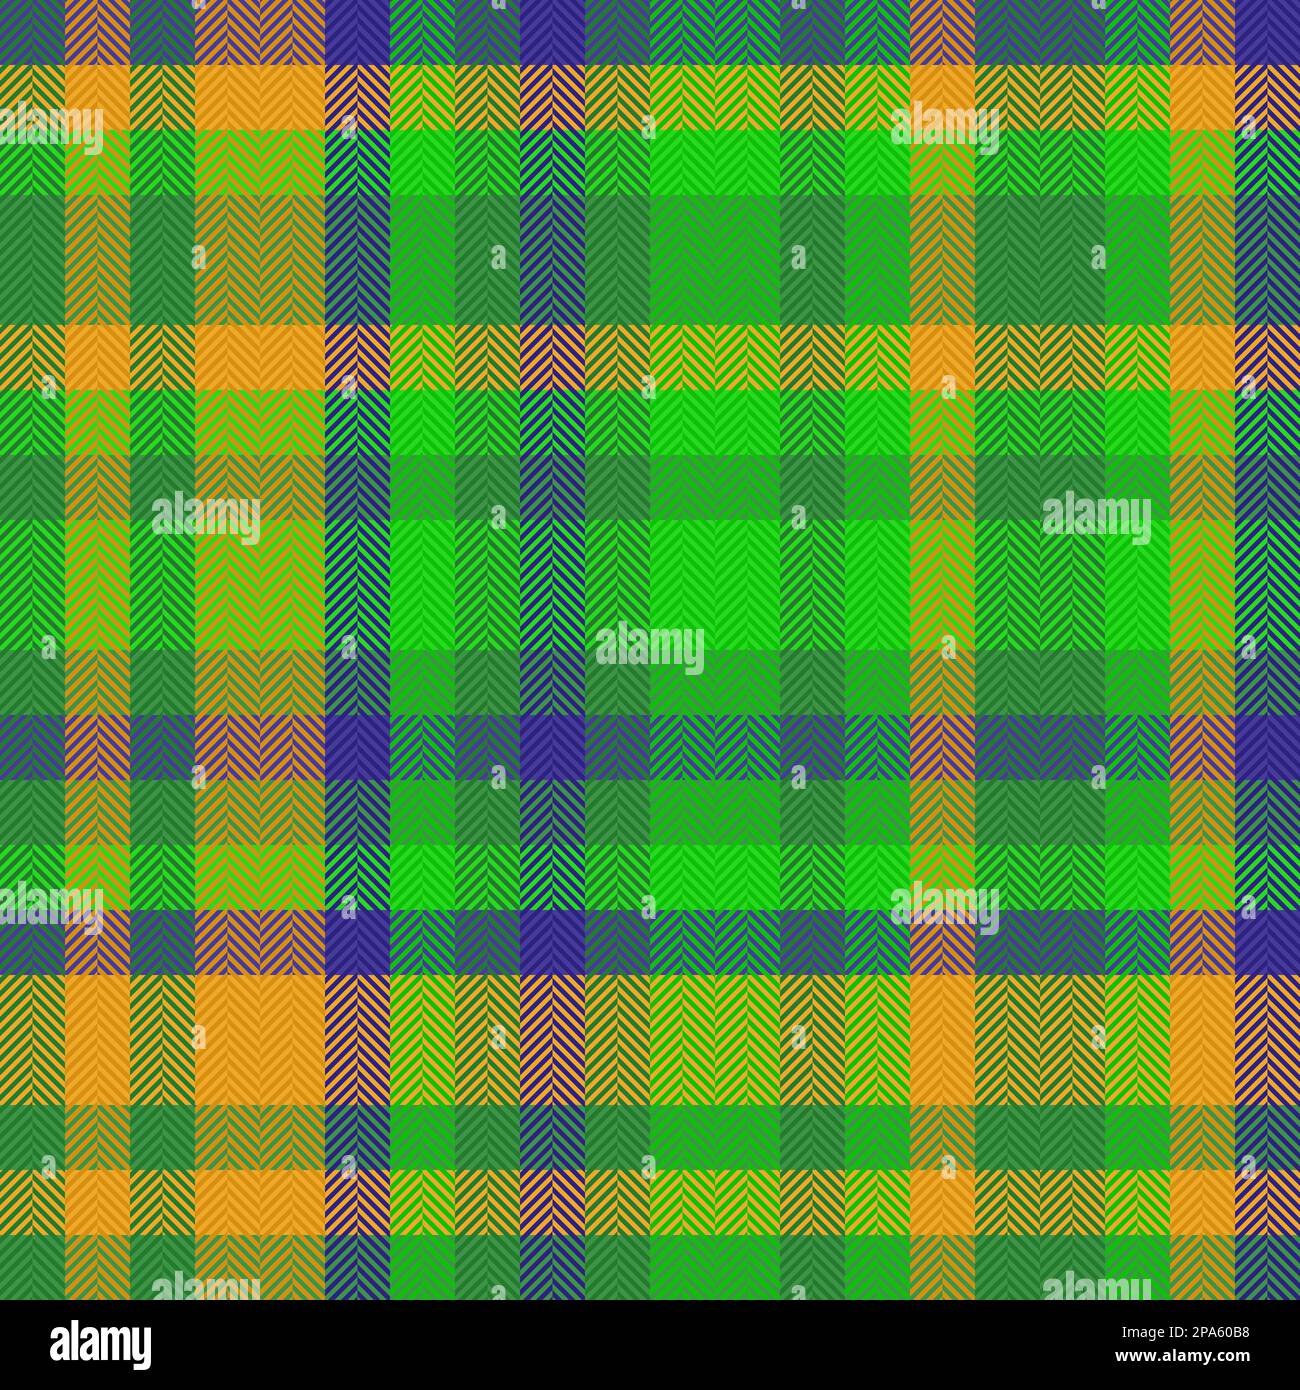 Background pattern vector. Check plaid tartan. Texture fabric textile seamless in green and amber colors. Stock Vector